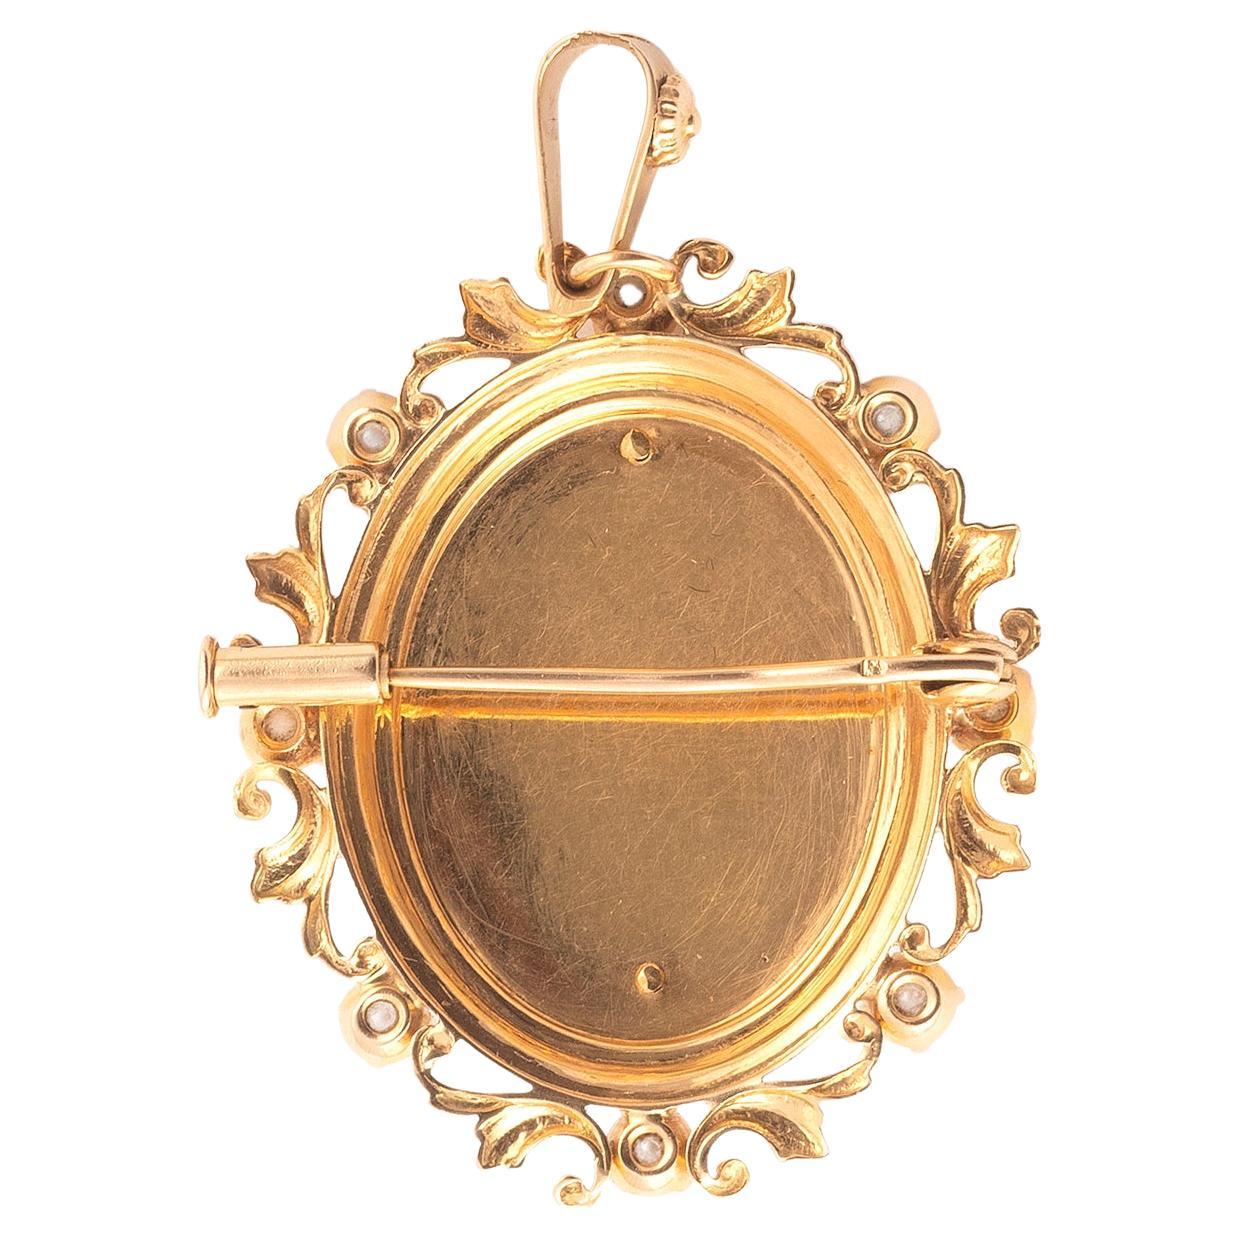 Pendent-Brooch composed of an oval decorated with interlacing punctuated with white pearls. 18K yellow gold frame. French work. Dimensions: 3.30 x 3.00 cm. Gross weight: 7.53 g.